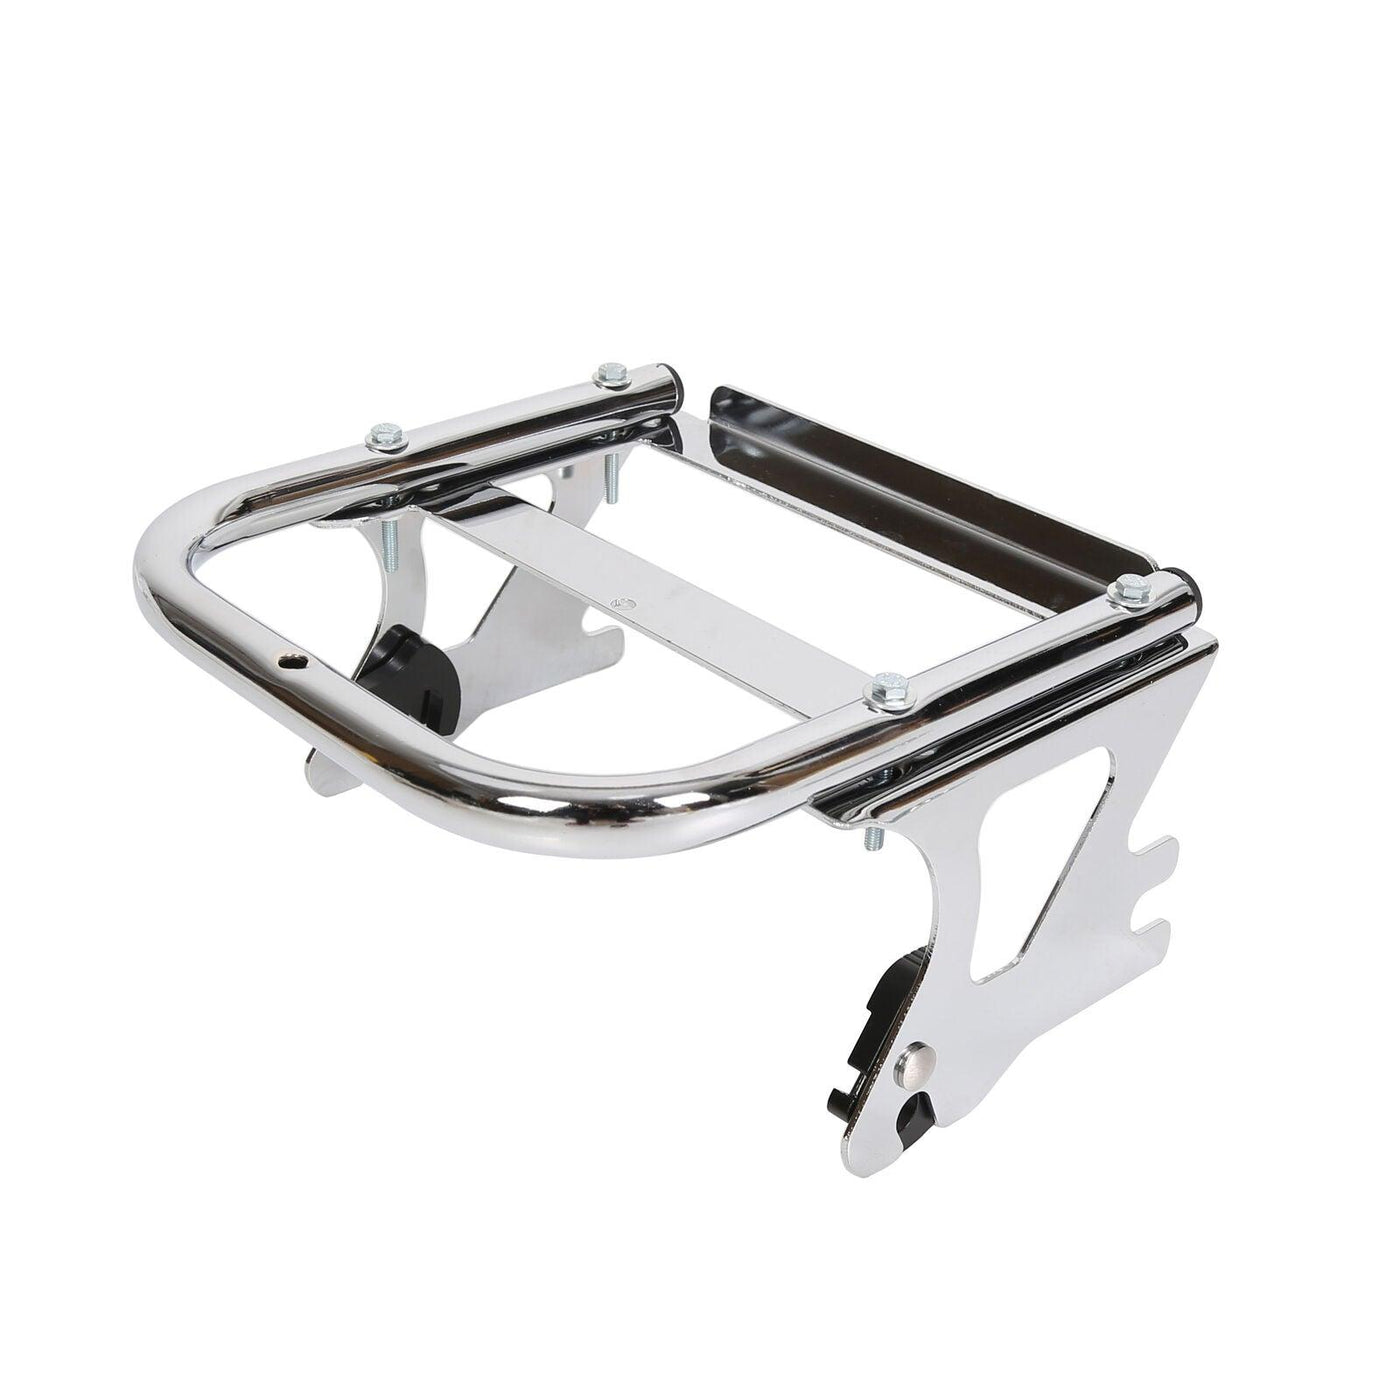 Detachable 2-up Tour Pak Mounting Luggage Rack For Harley Road King Glide 97-08 - Moto Life Products